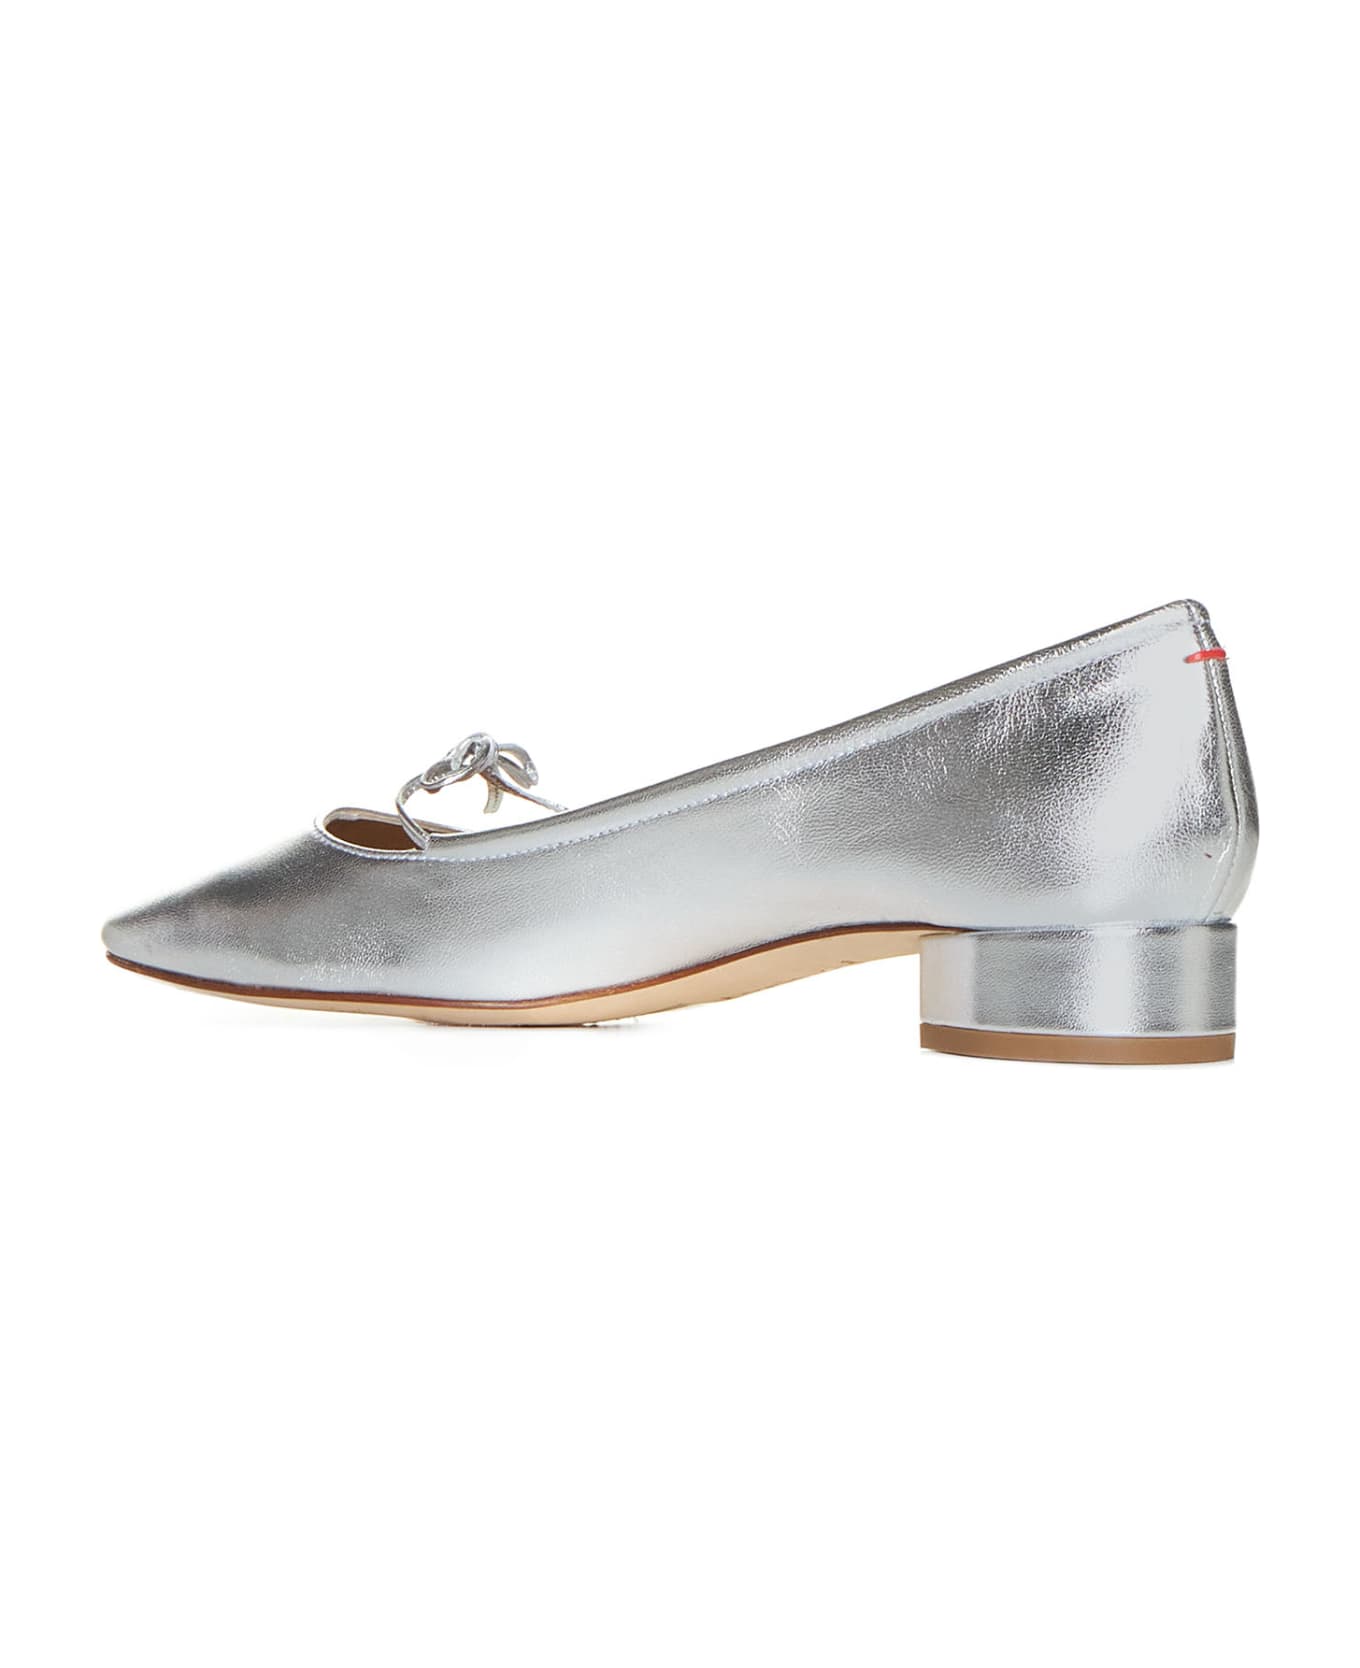 aeyde Flat Shoes - Silver フラットシューズ